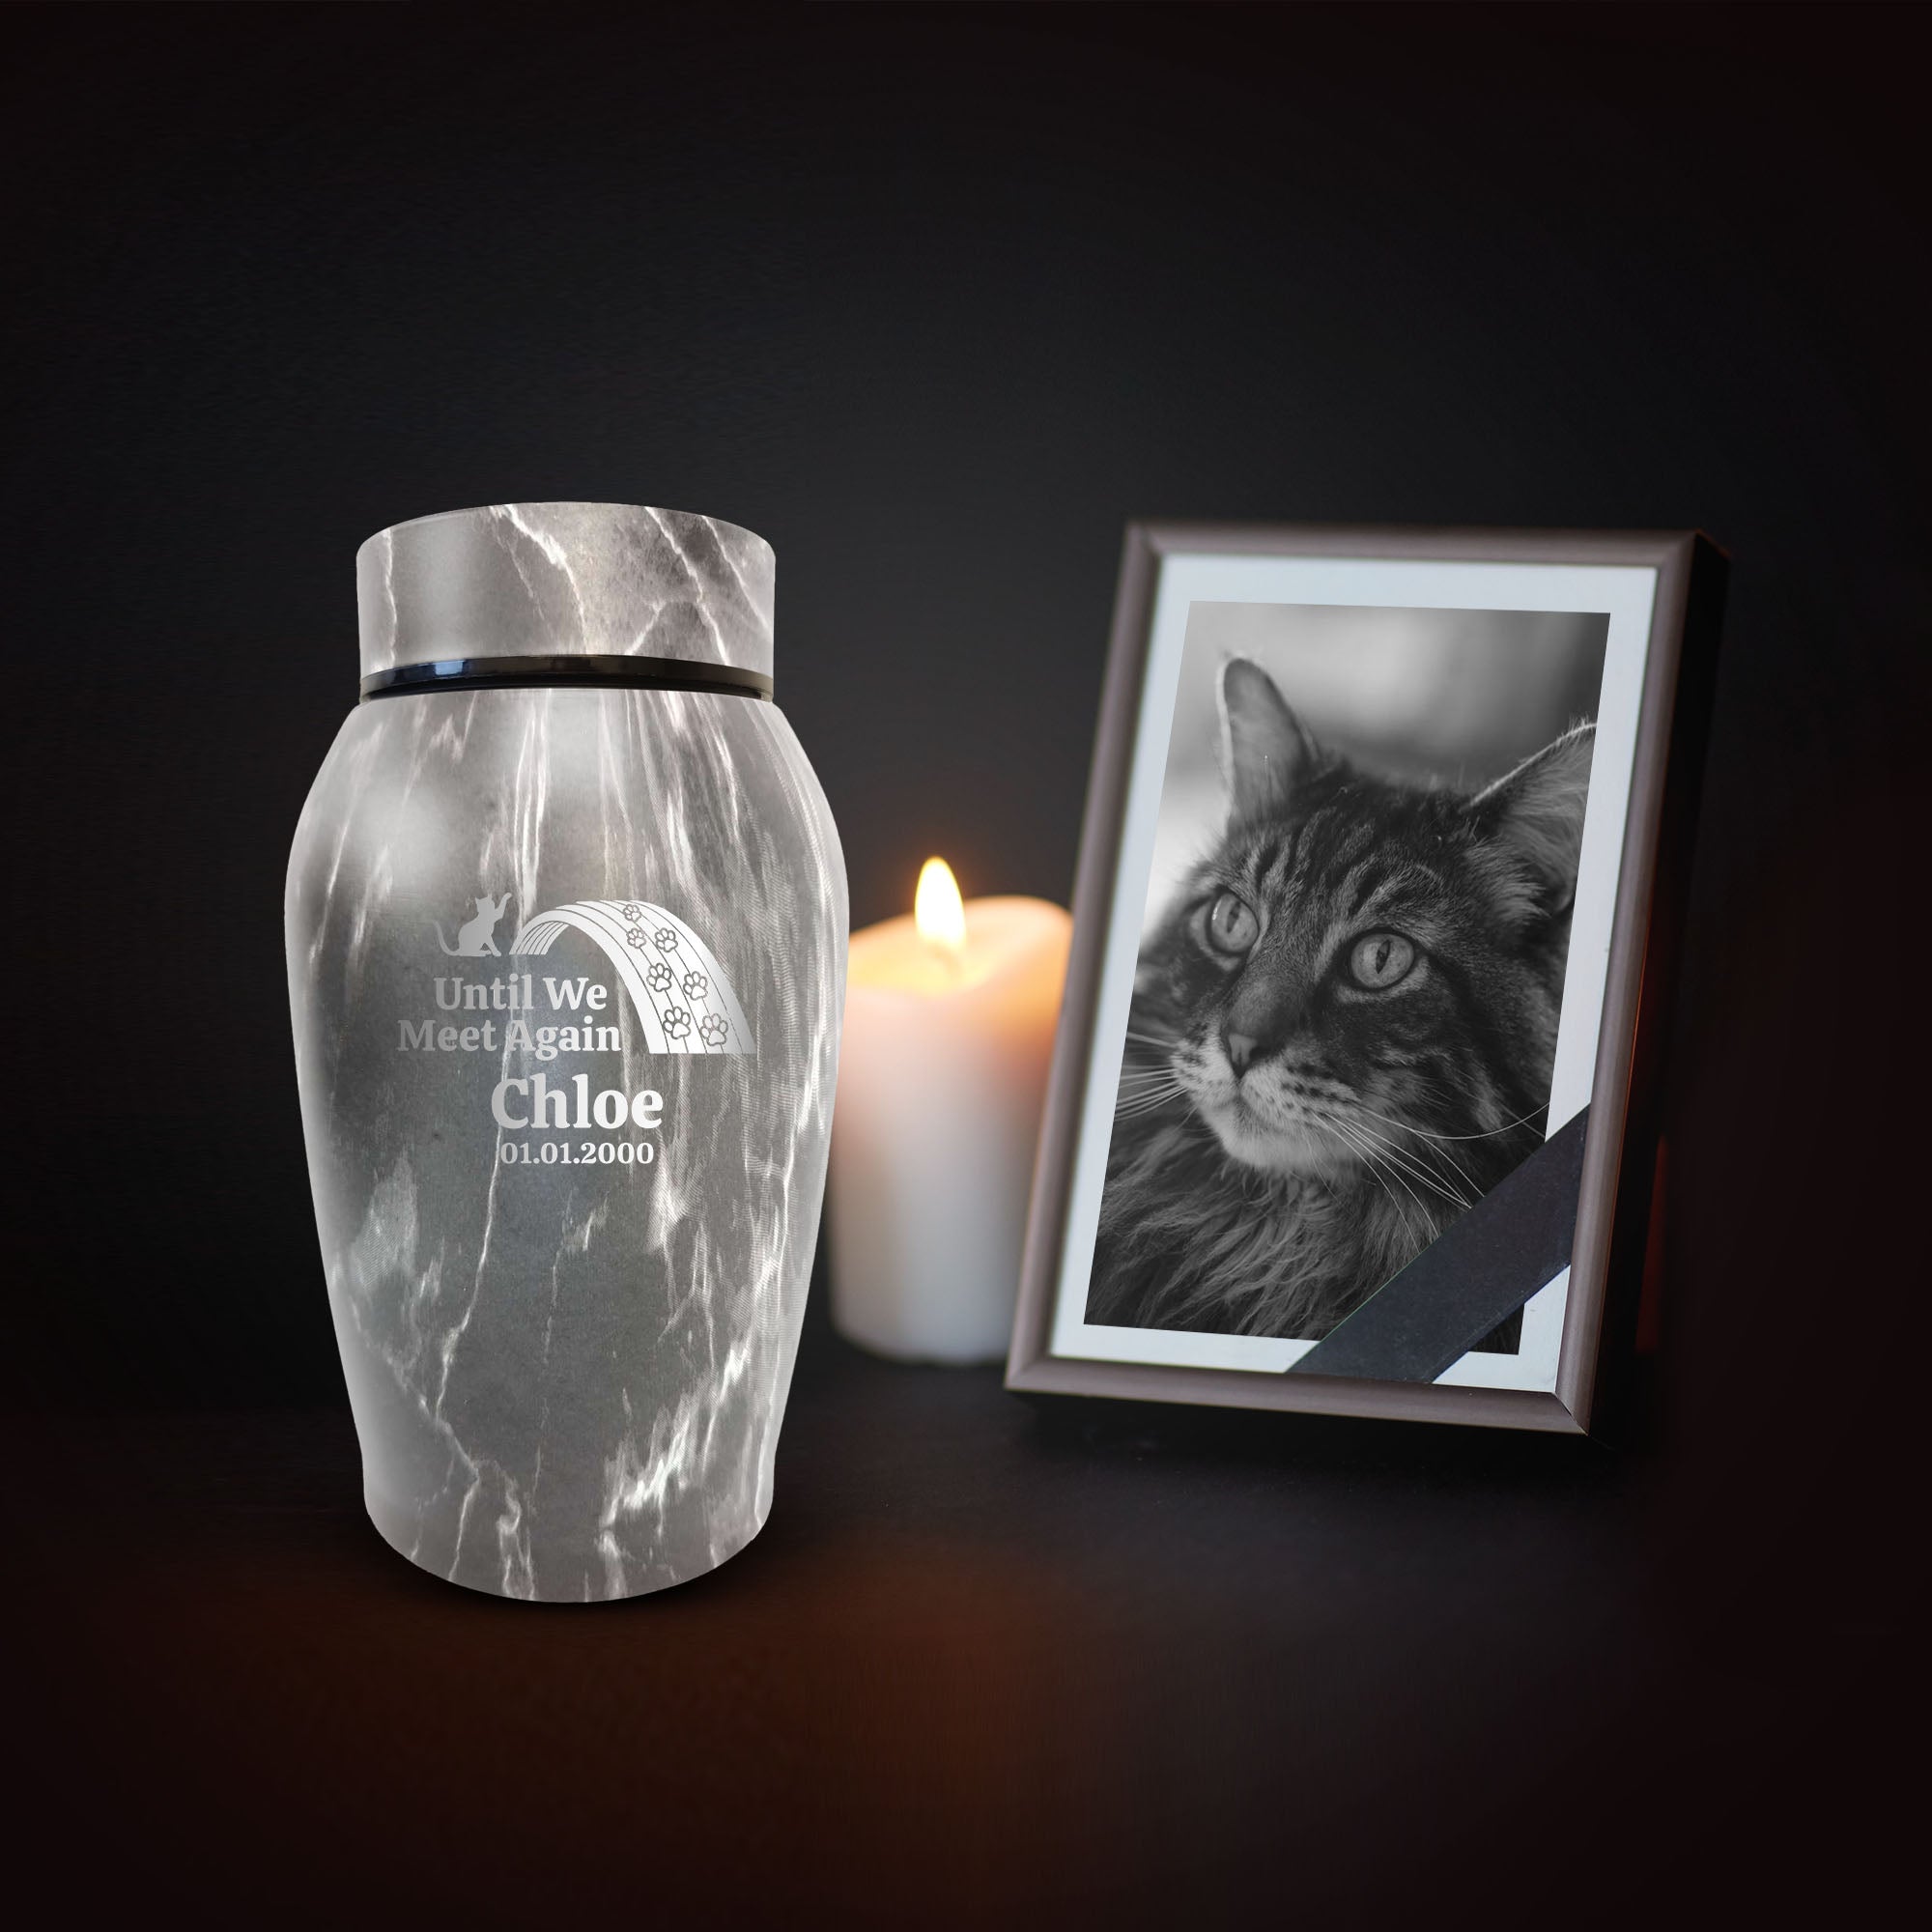 Personalized Stone Gray Cat Urn: Engraved Cat Name and Date - Stainless Steel Cremation Urns for Cat Ashes with Airtight Closure | Stone Gray